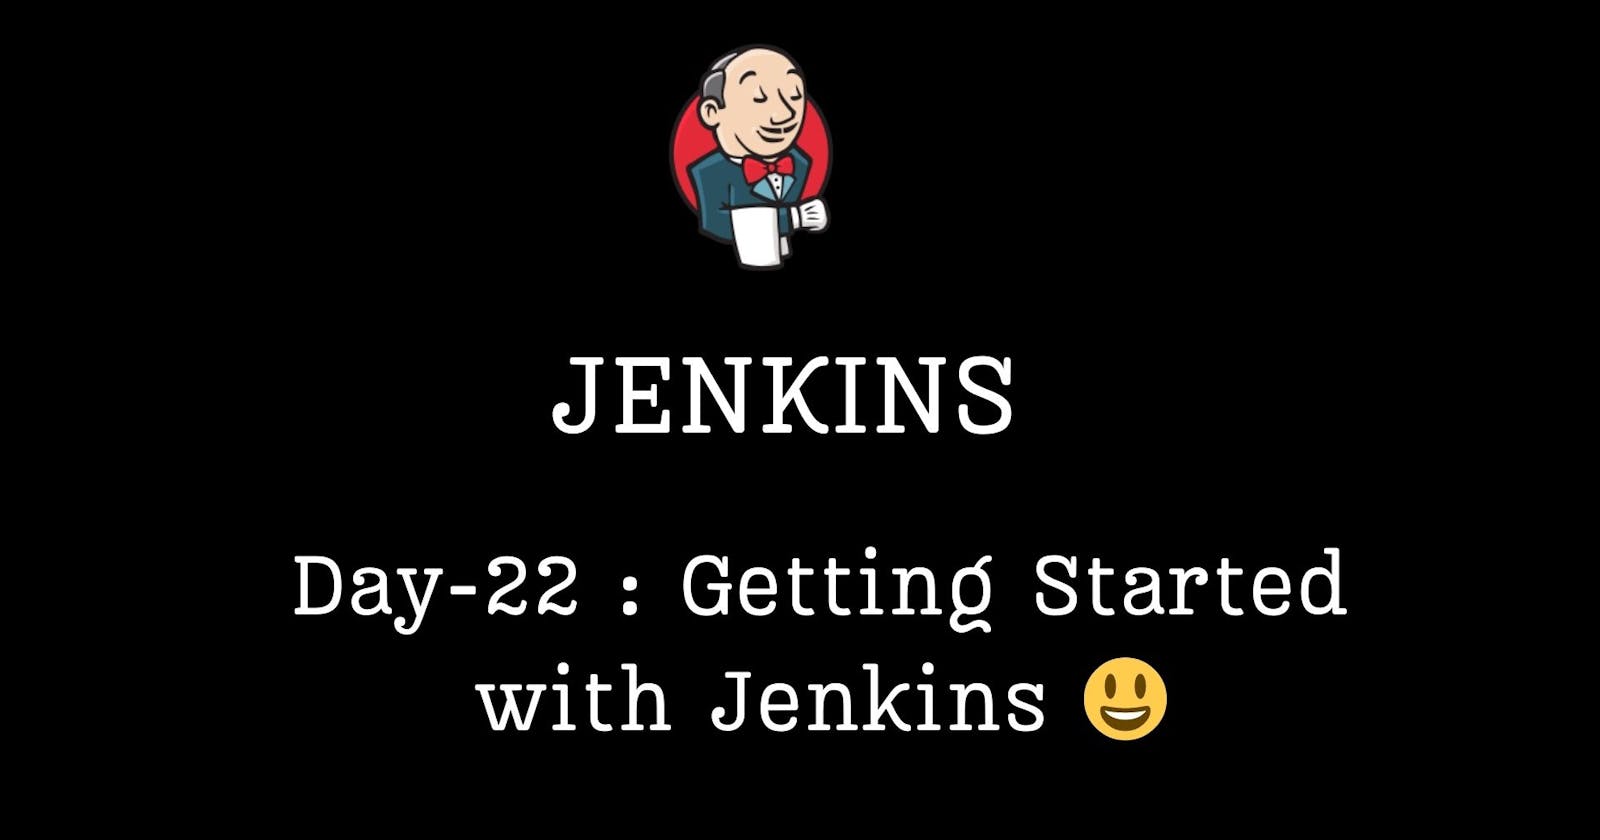 Day-22 Getting Started with Jenkins